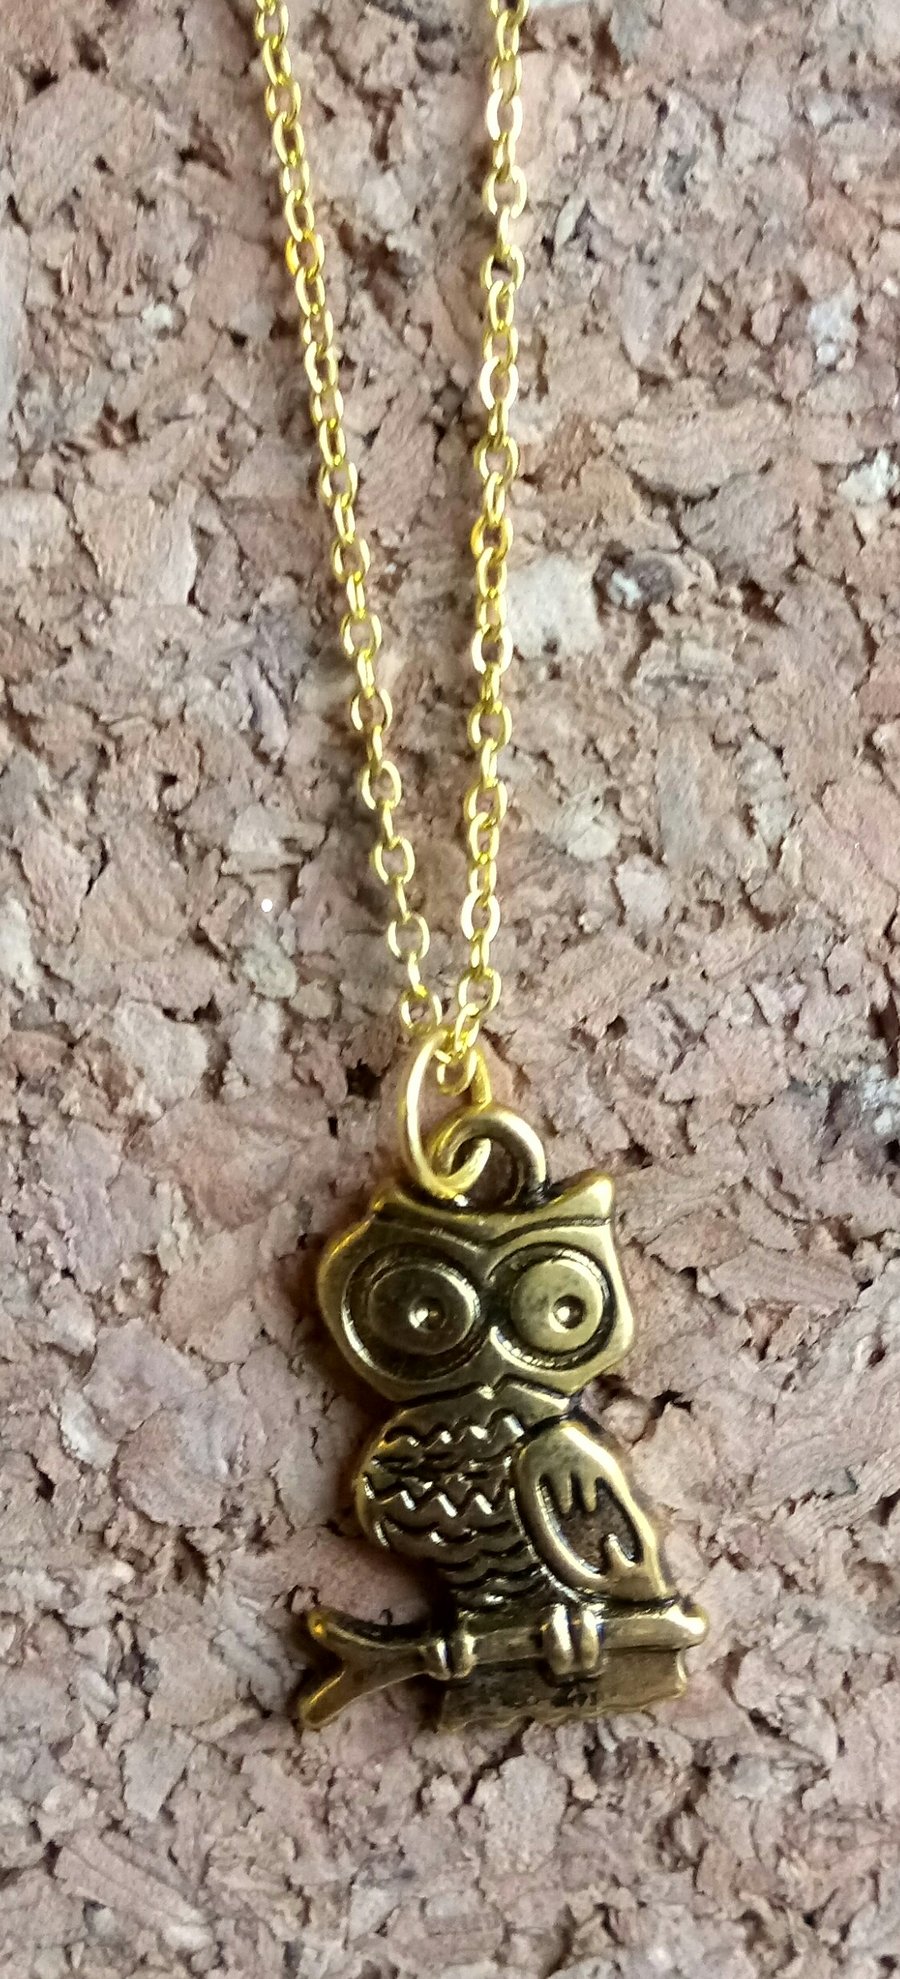 Wise Owl on a Golden Chain